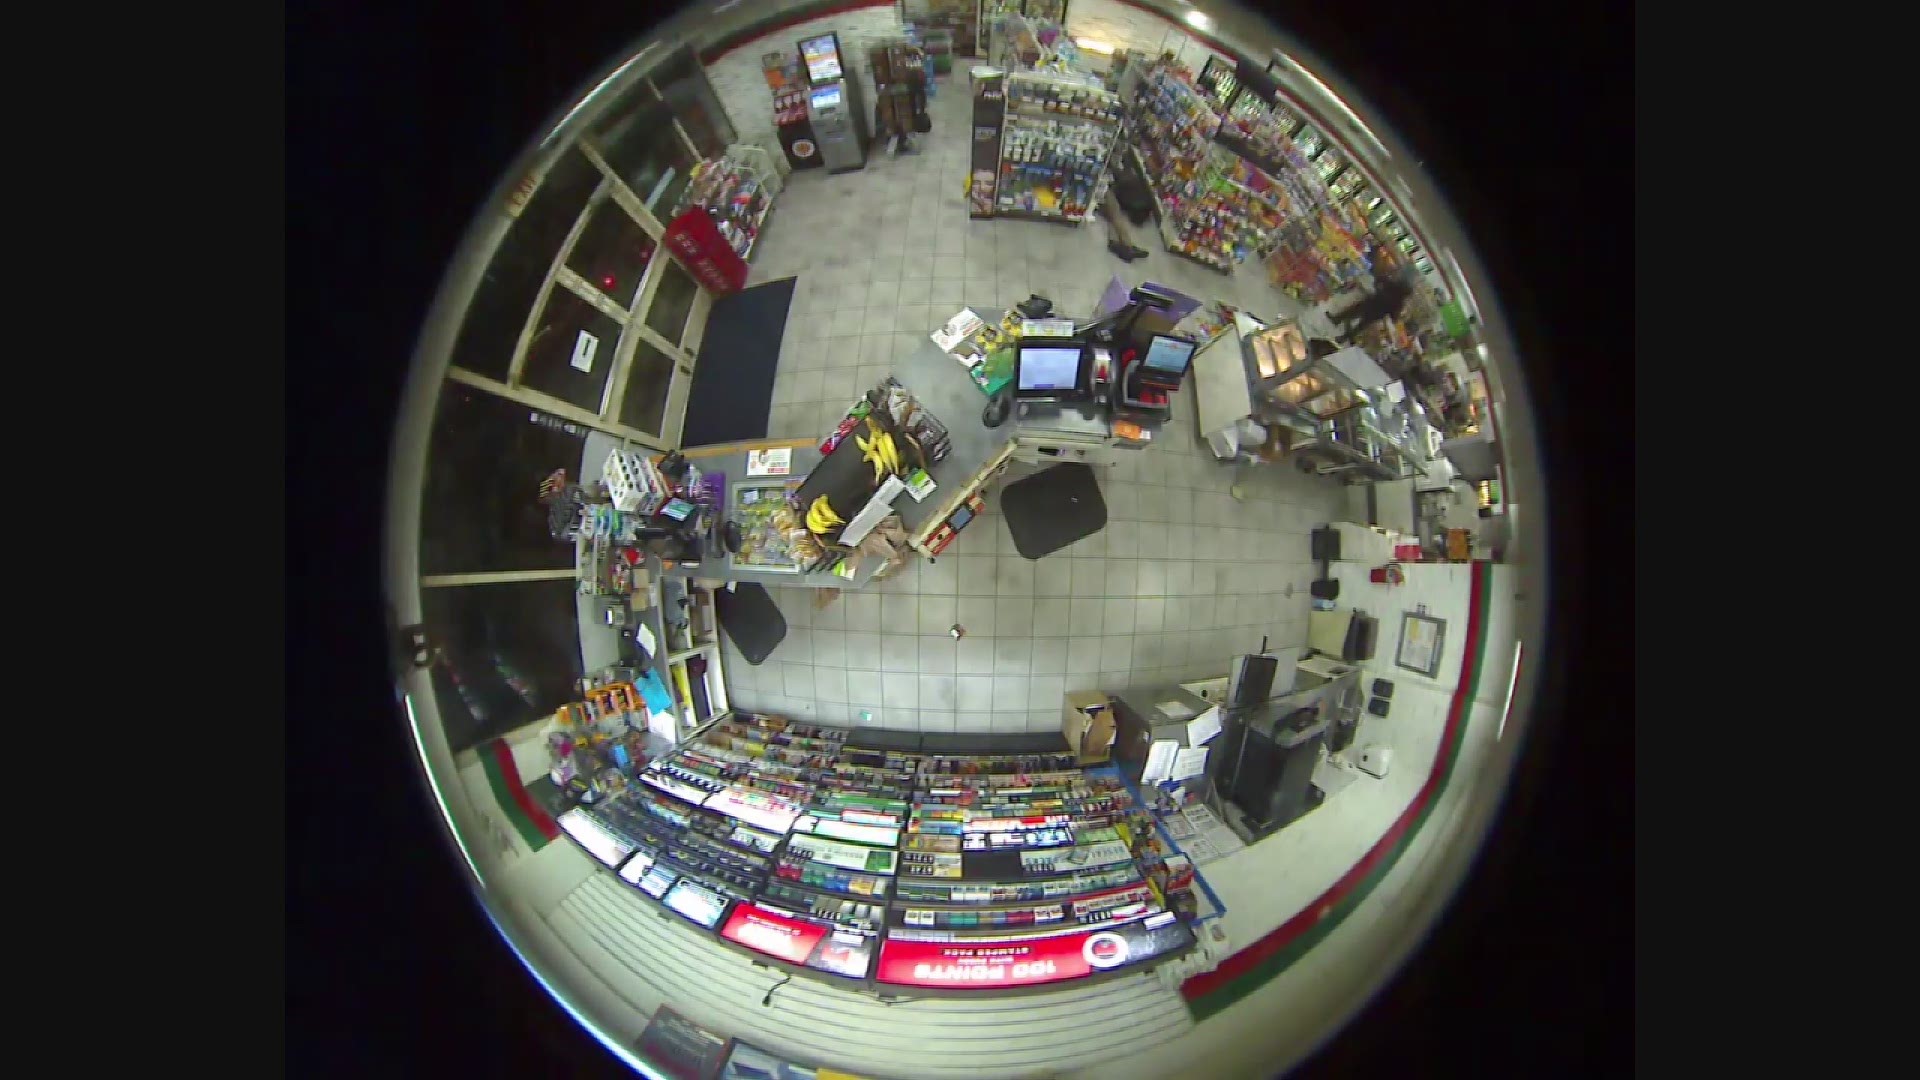 The smash and grab occurred at a Silver Spring 7-Eleven.